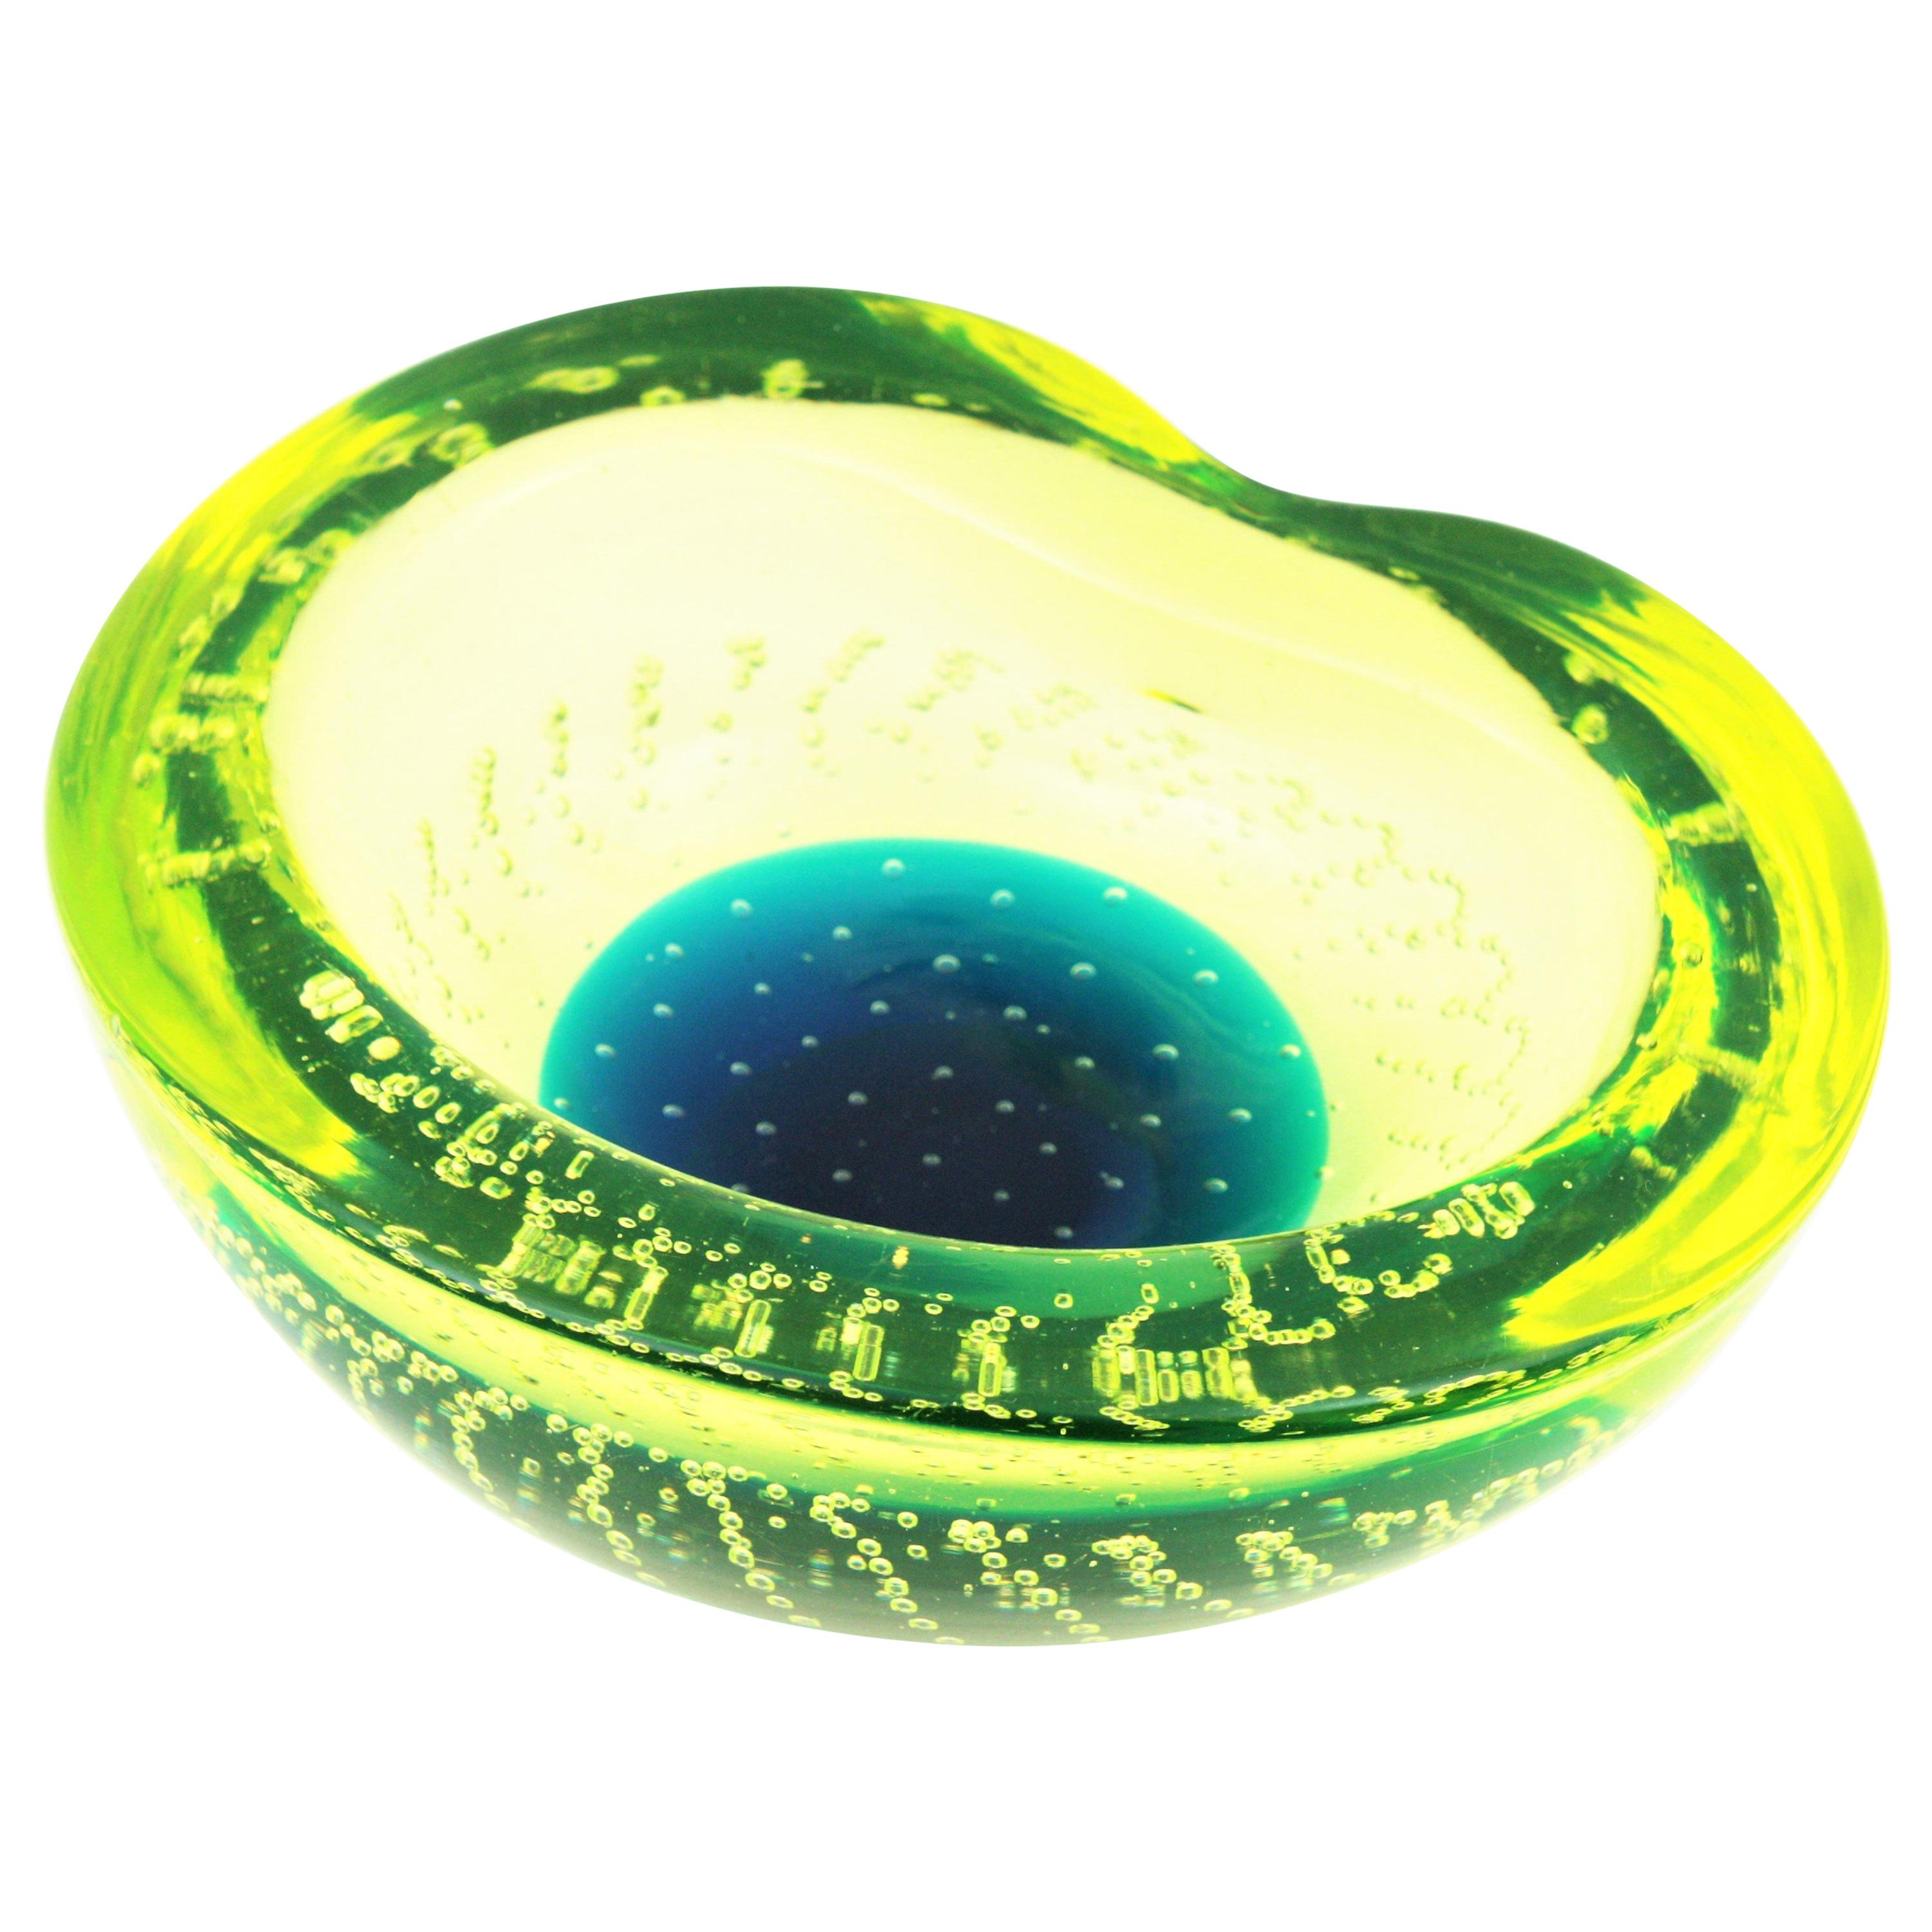 Amazing Murano art glass bullicante decorative bowl. Attributed to Galliano Ferro, Italy, 1950-1960s.
An spectacular decorative design with hundreds of controlled blown bubbles in a bowl in acid yellow-green color with a central circle in Klein